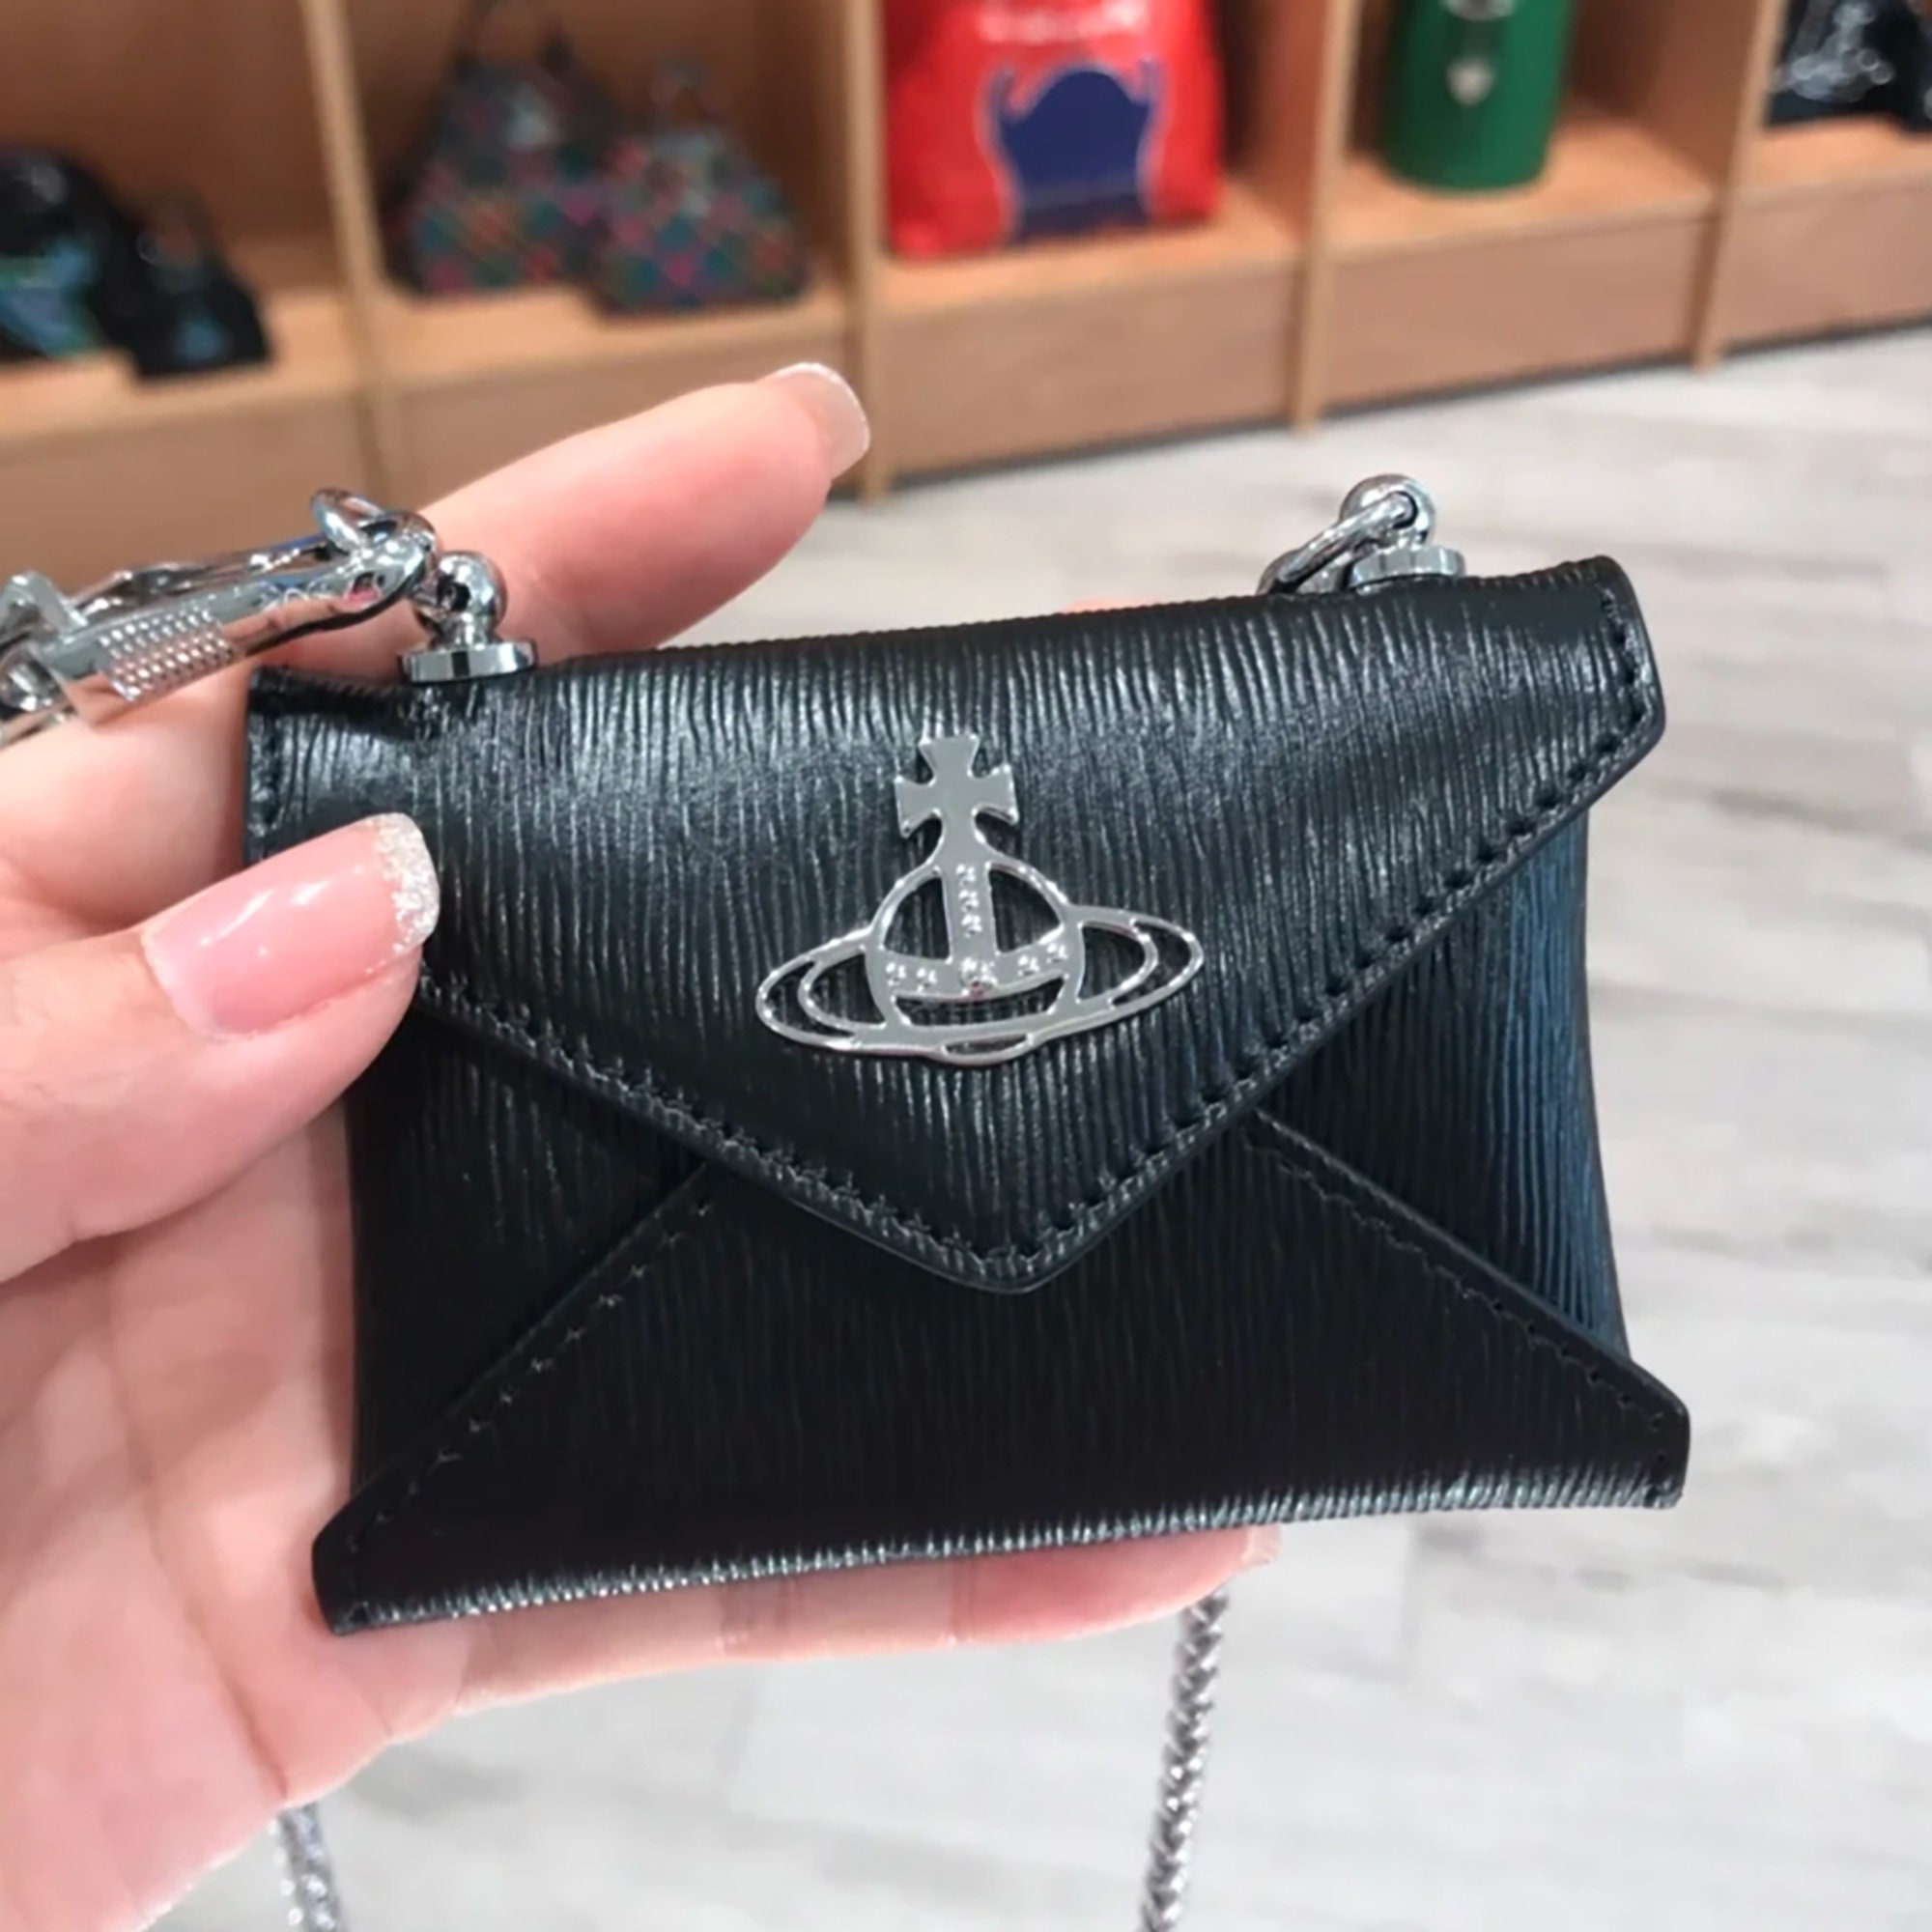 River Island is selling a £310 Vivienne Westwood bag 'dupe' - and